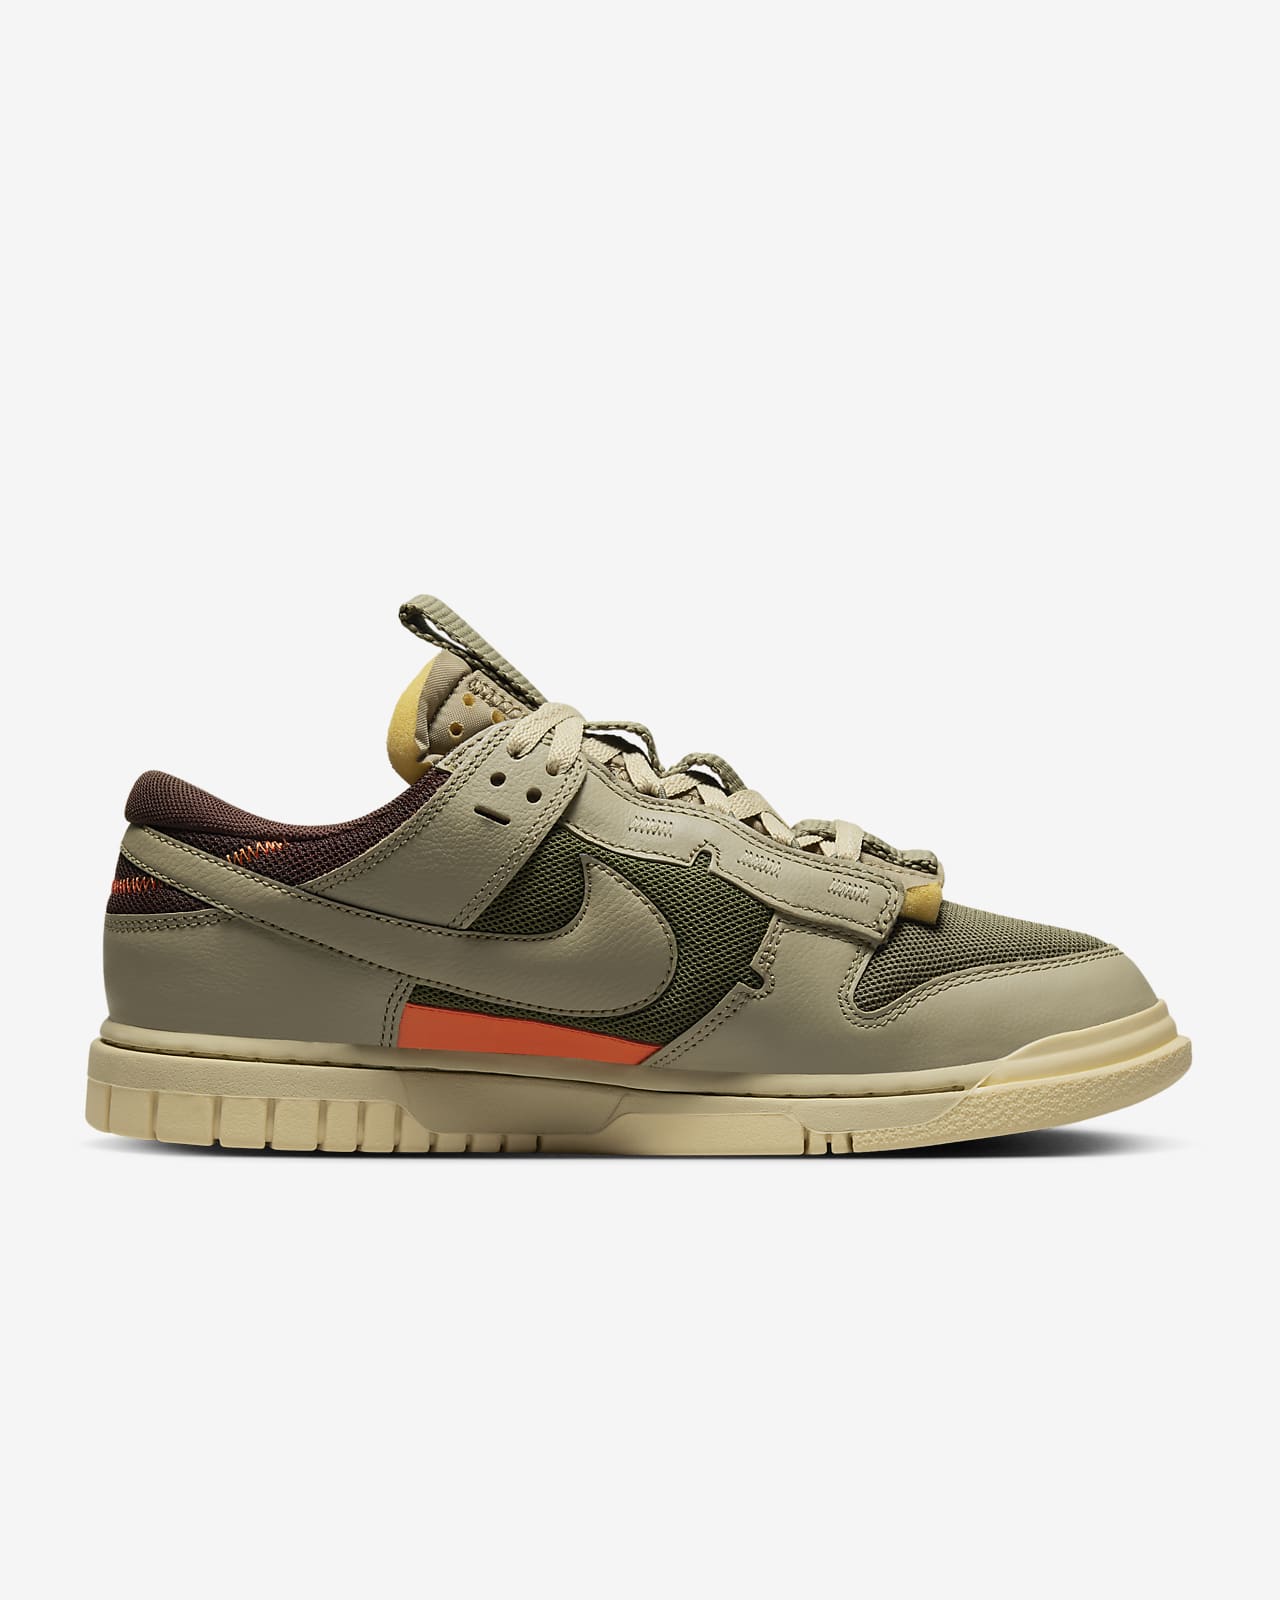 Nike - Dunk Low Remastered - Neutral Olive